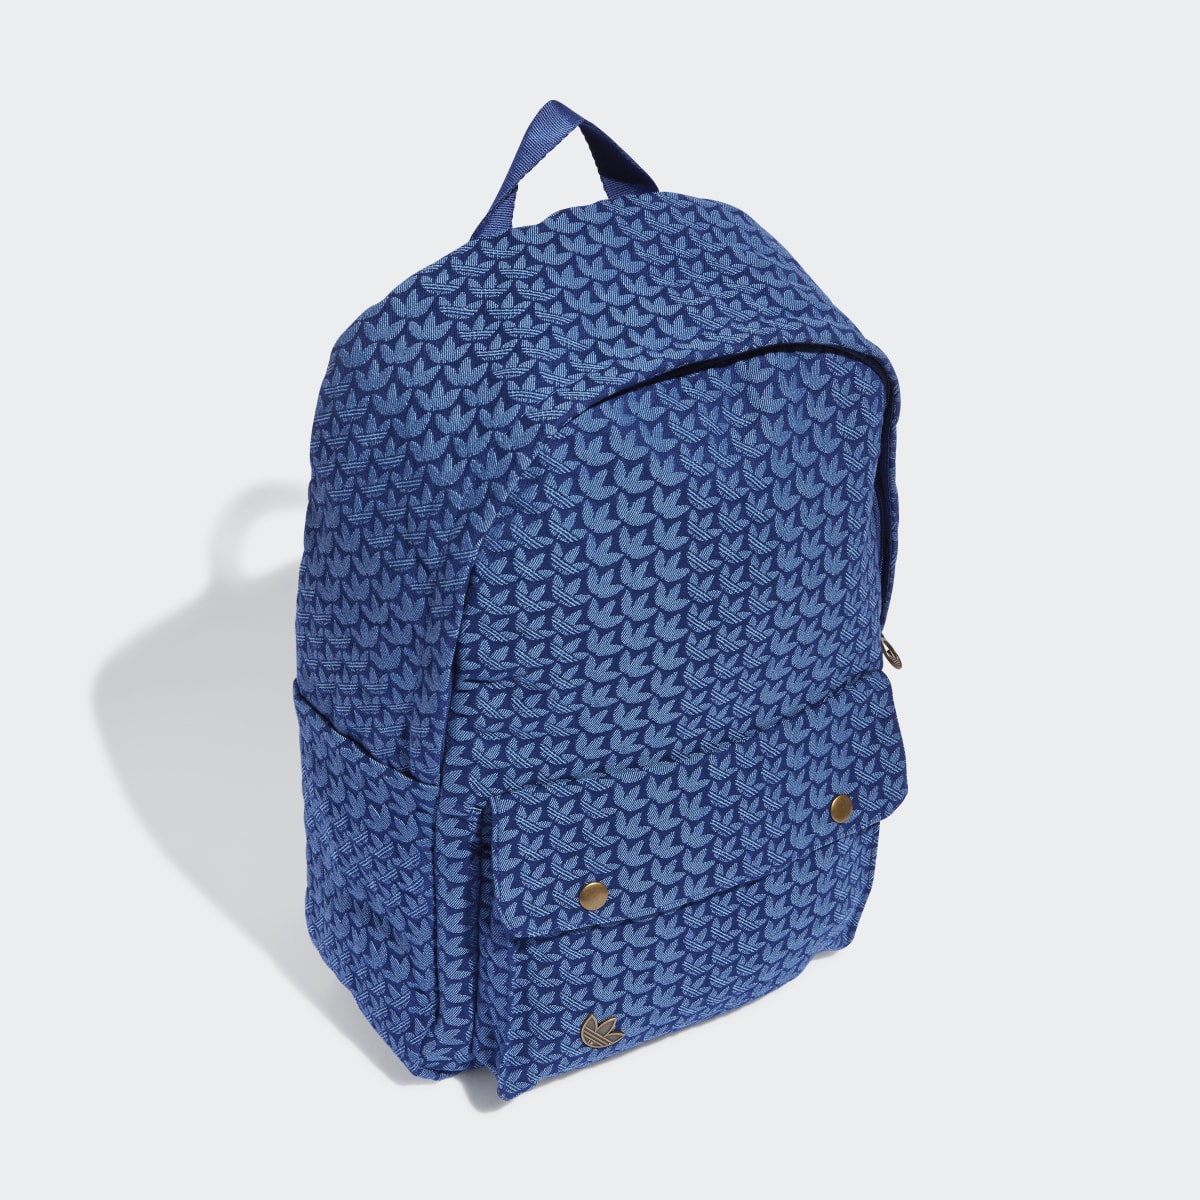 Adidas Classic Backpack. 4